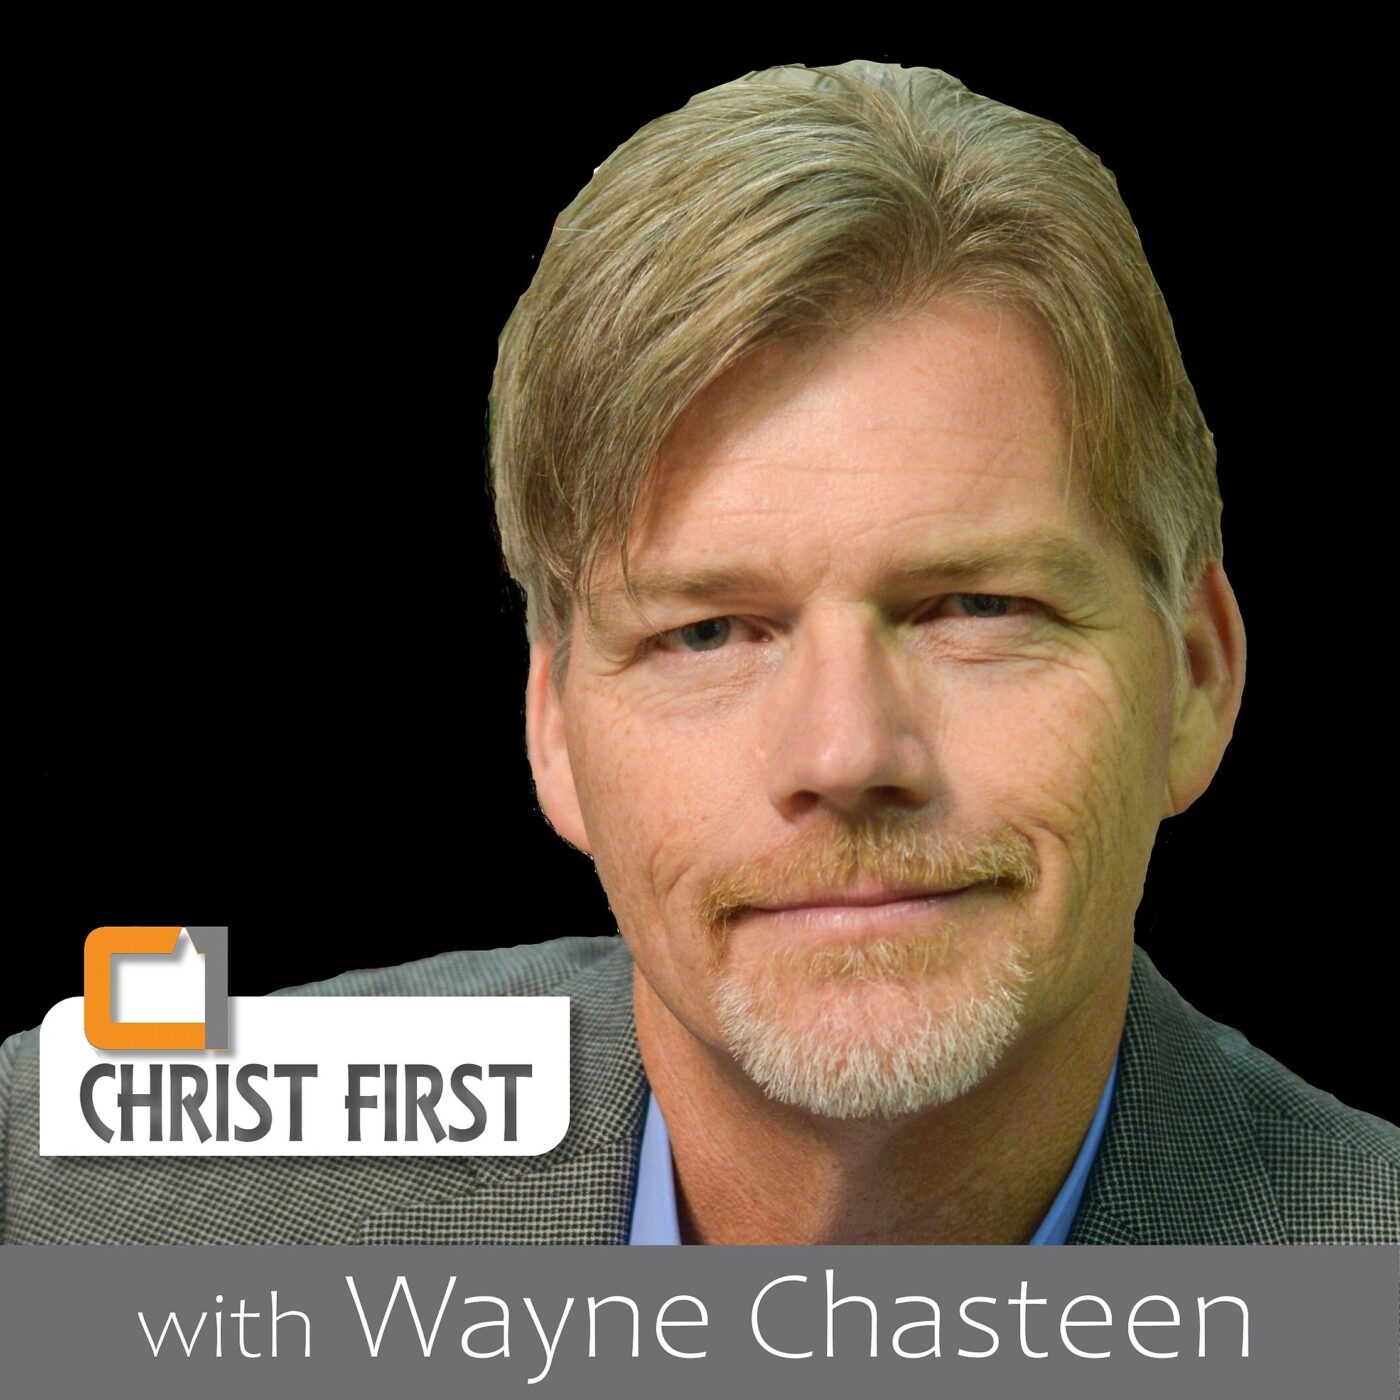 CHRIST FIRST, with Wayne Chasteen